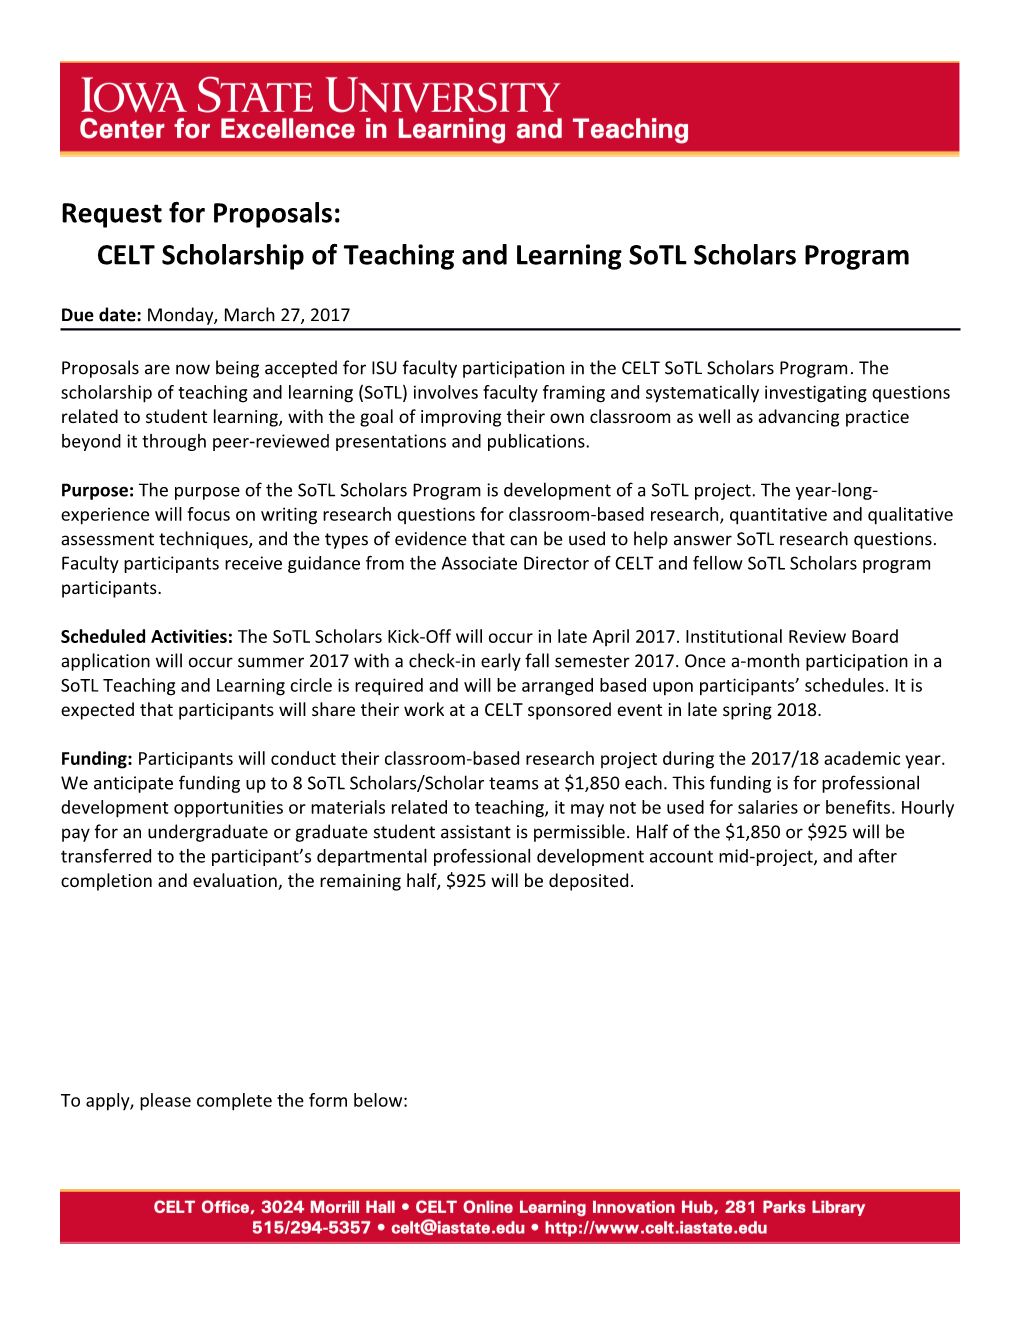 Request for Proposals: CELT Scholarship of Teaching and Learning Sotl Scholars Program